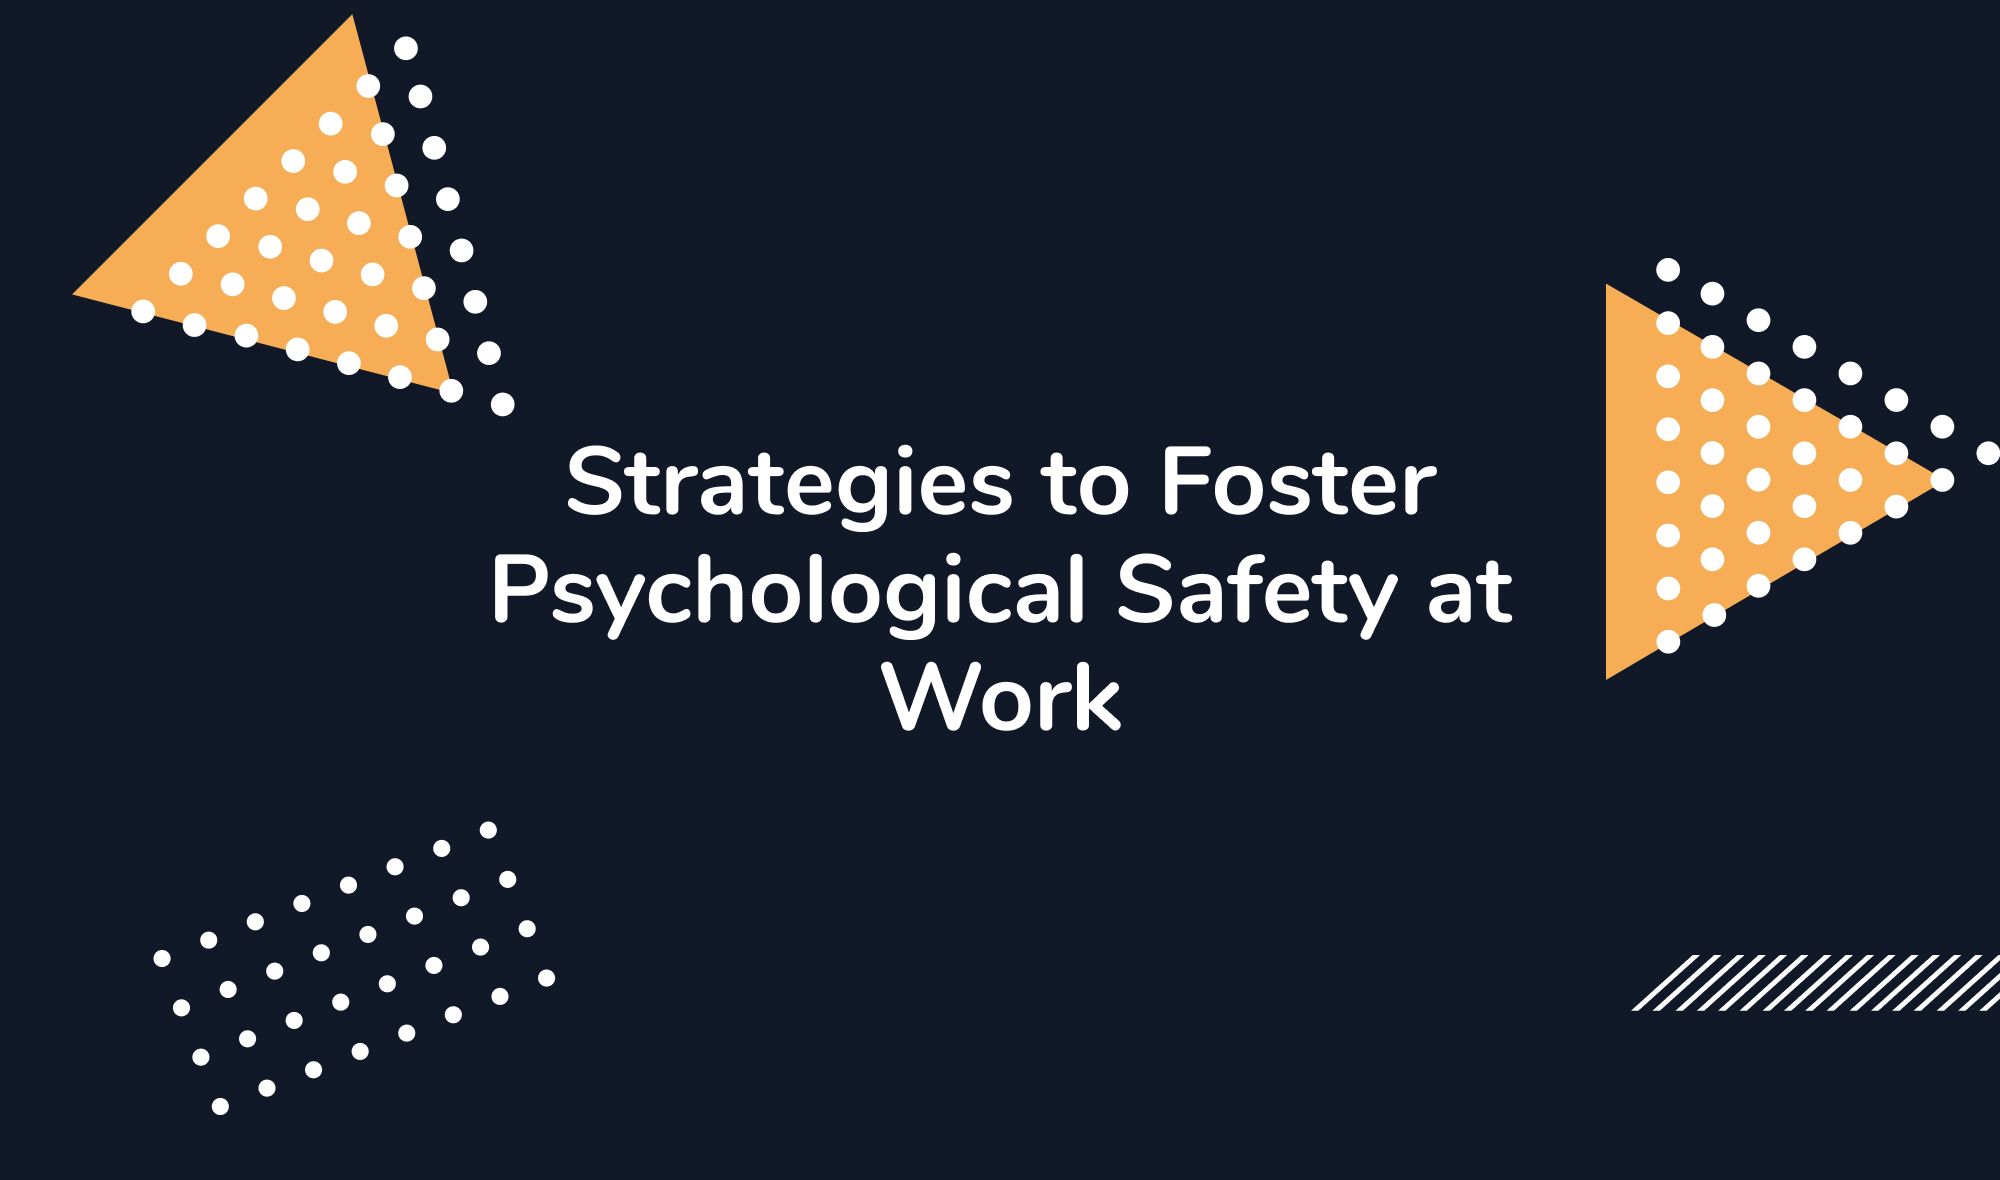 Strategies to Foster Psychological Safety at Work